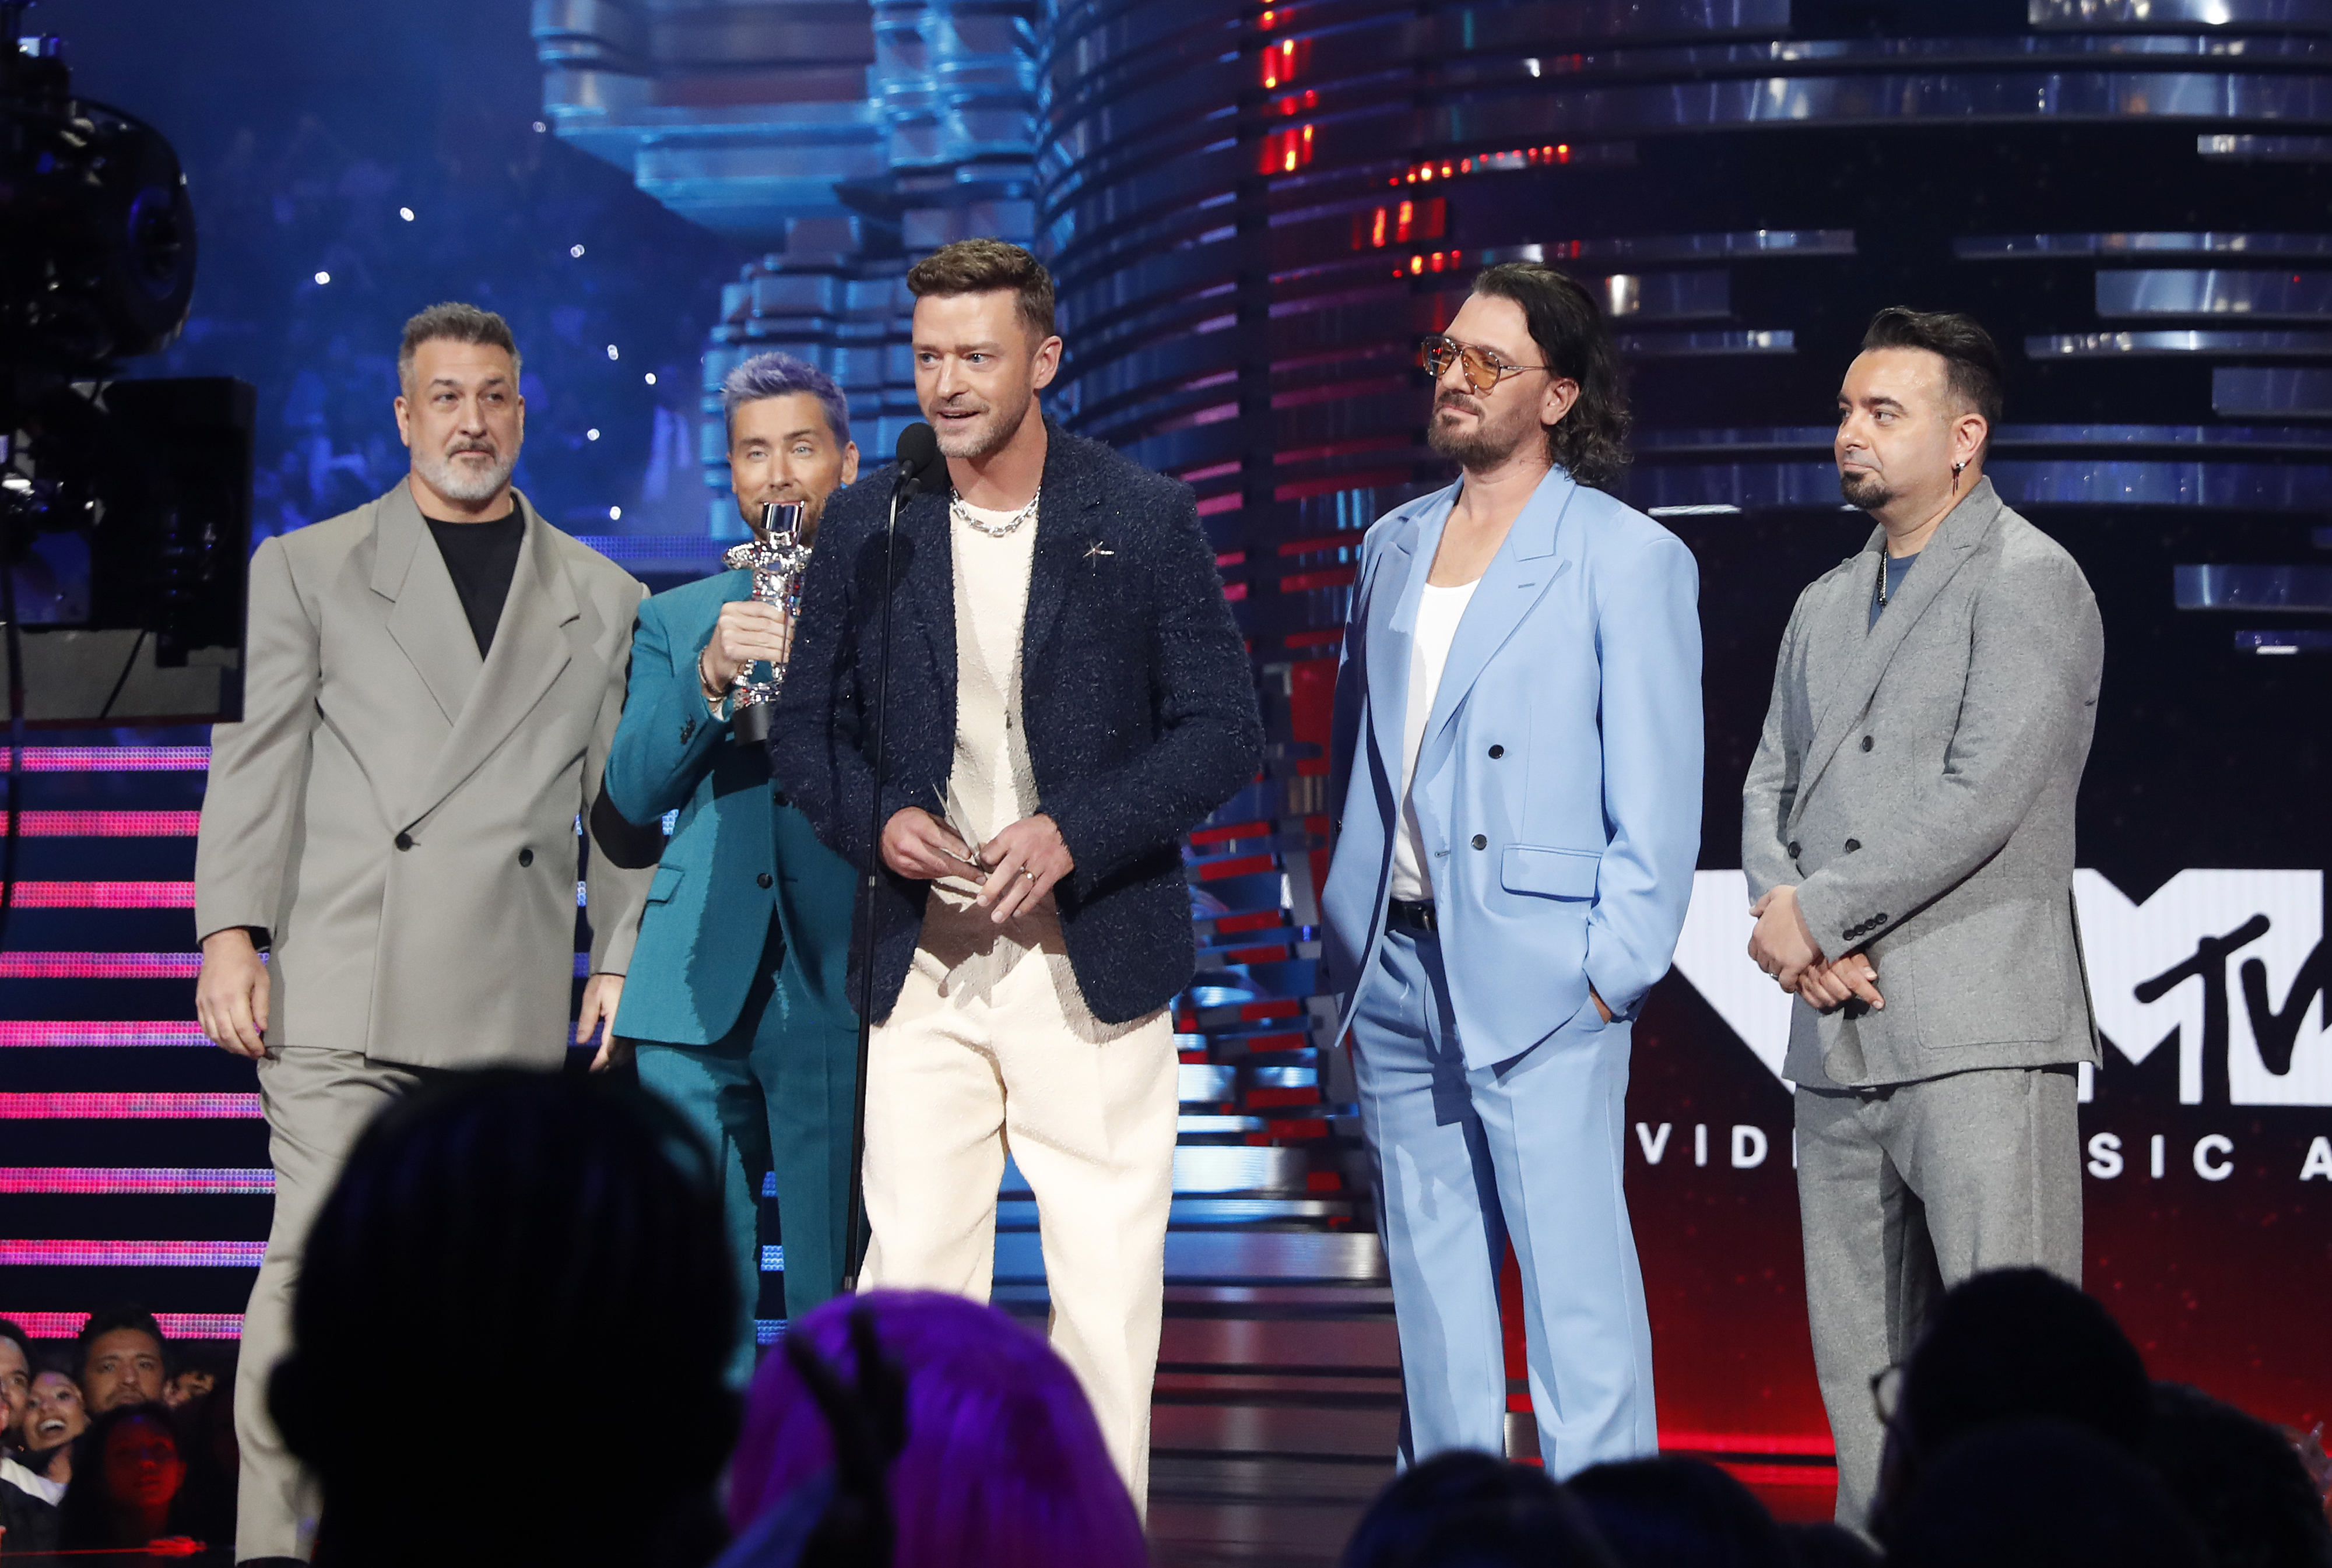 The members of NSYNC reunited to present at the 2023 MTV Video Music Awards